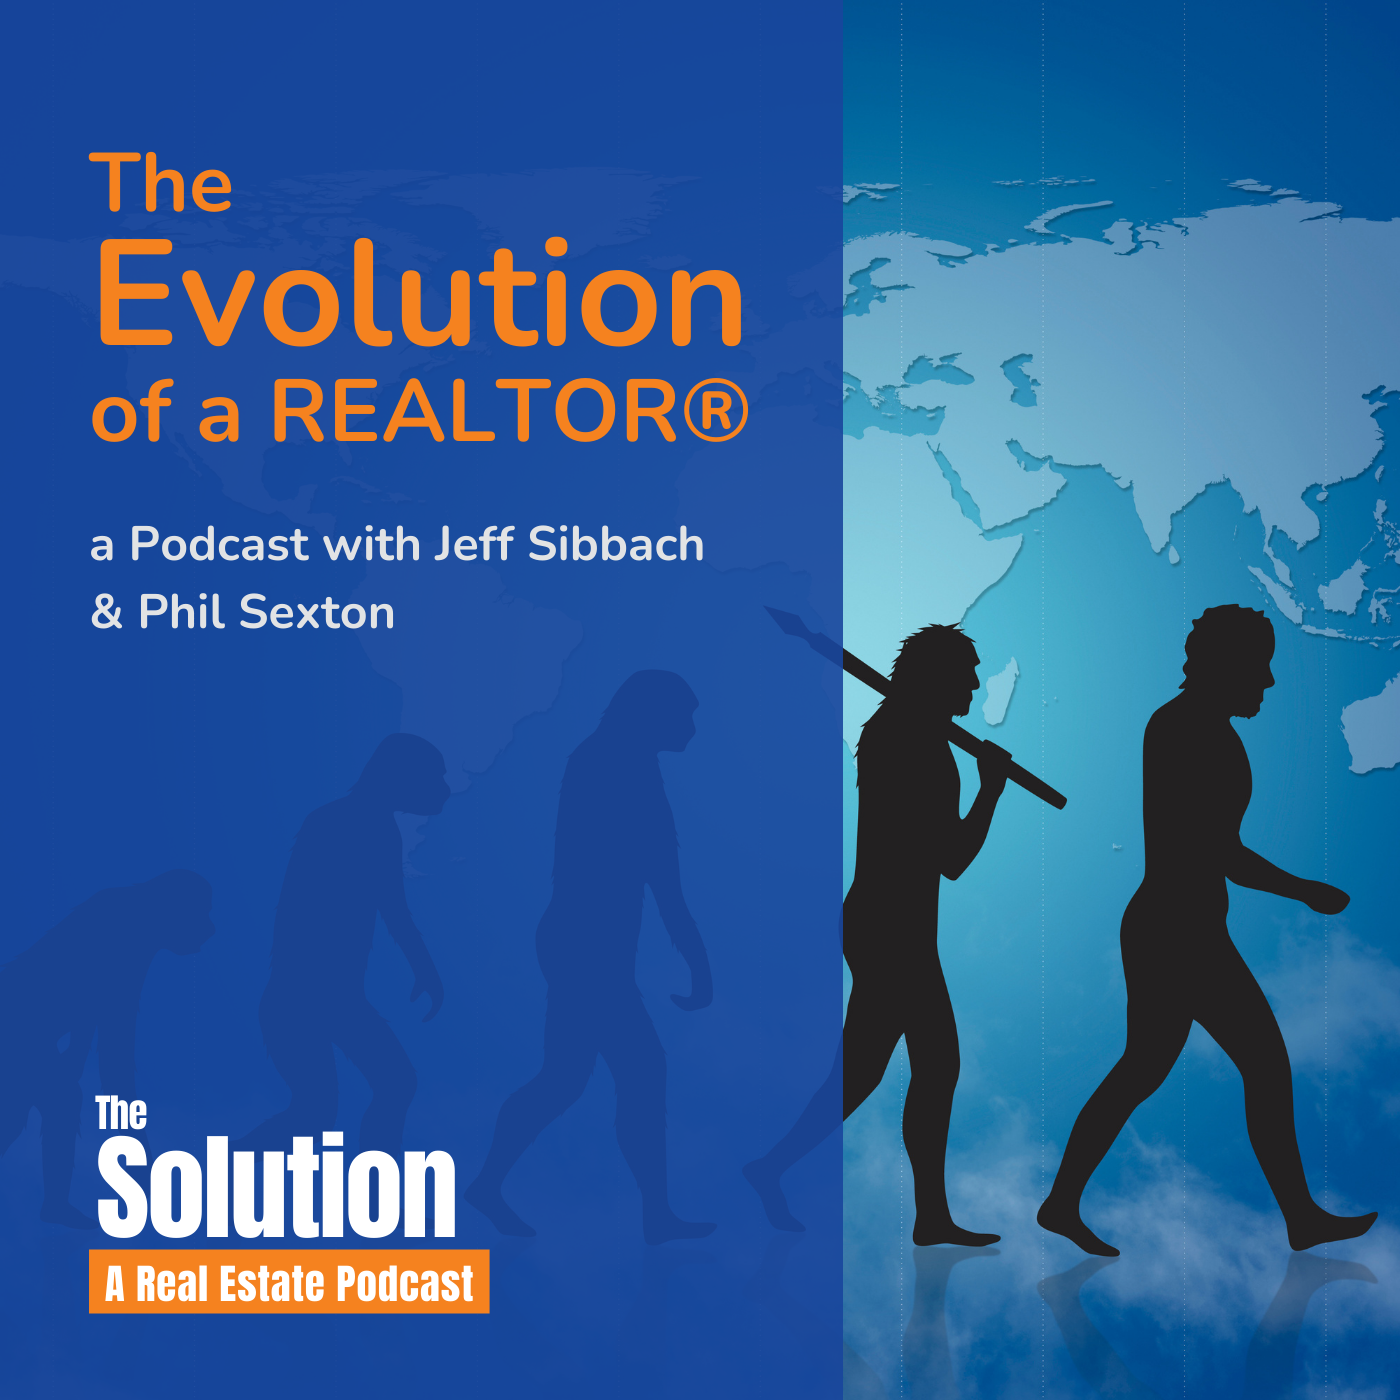 Artwork for podcast The Solution a Real Estate Podcast